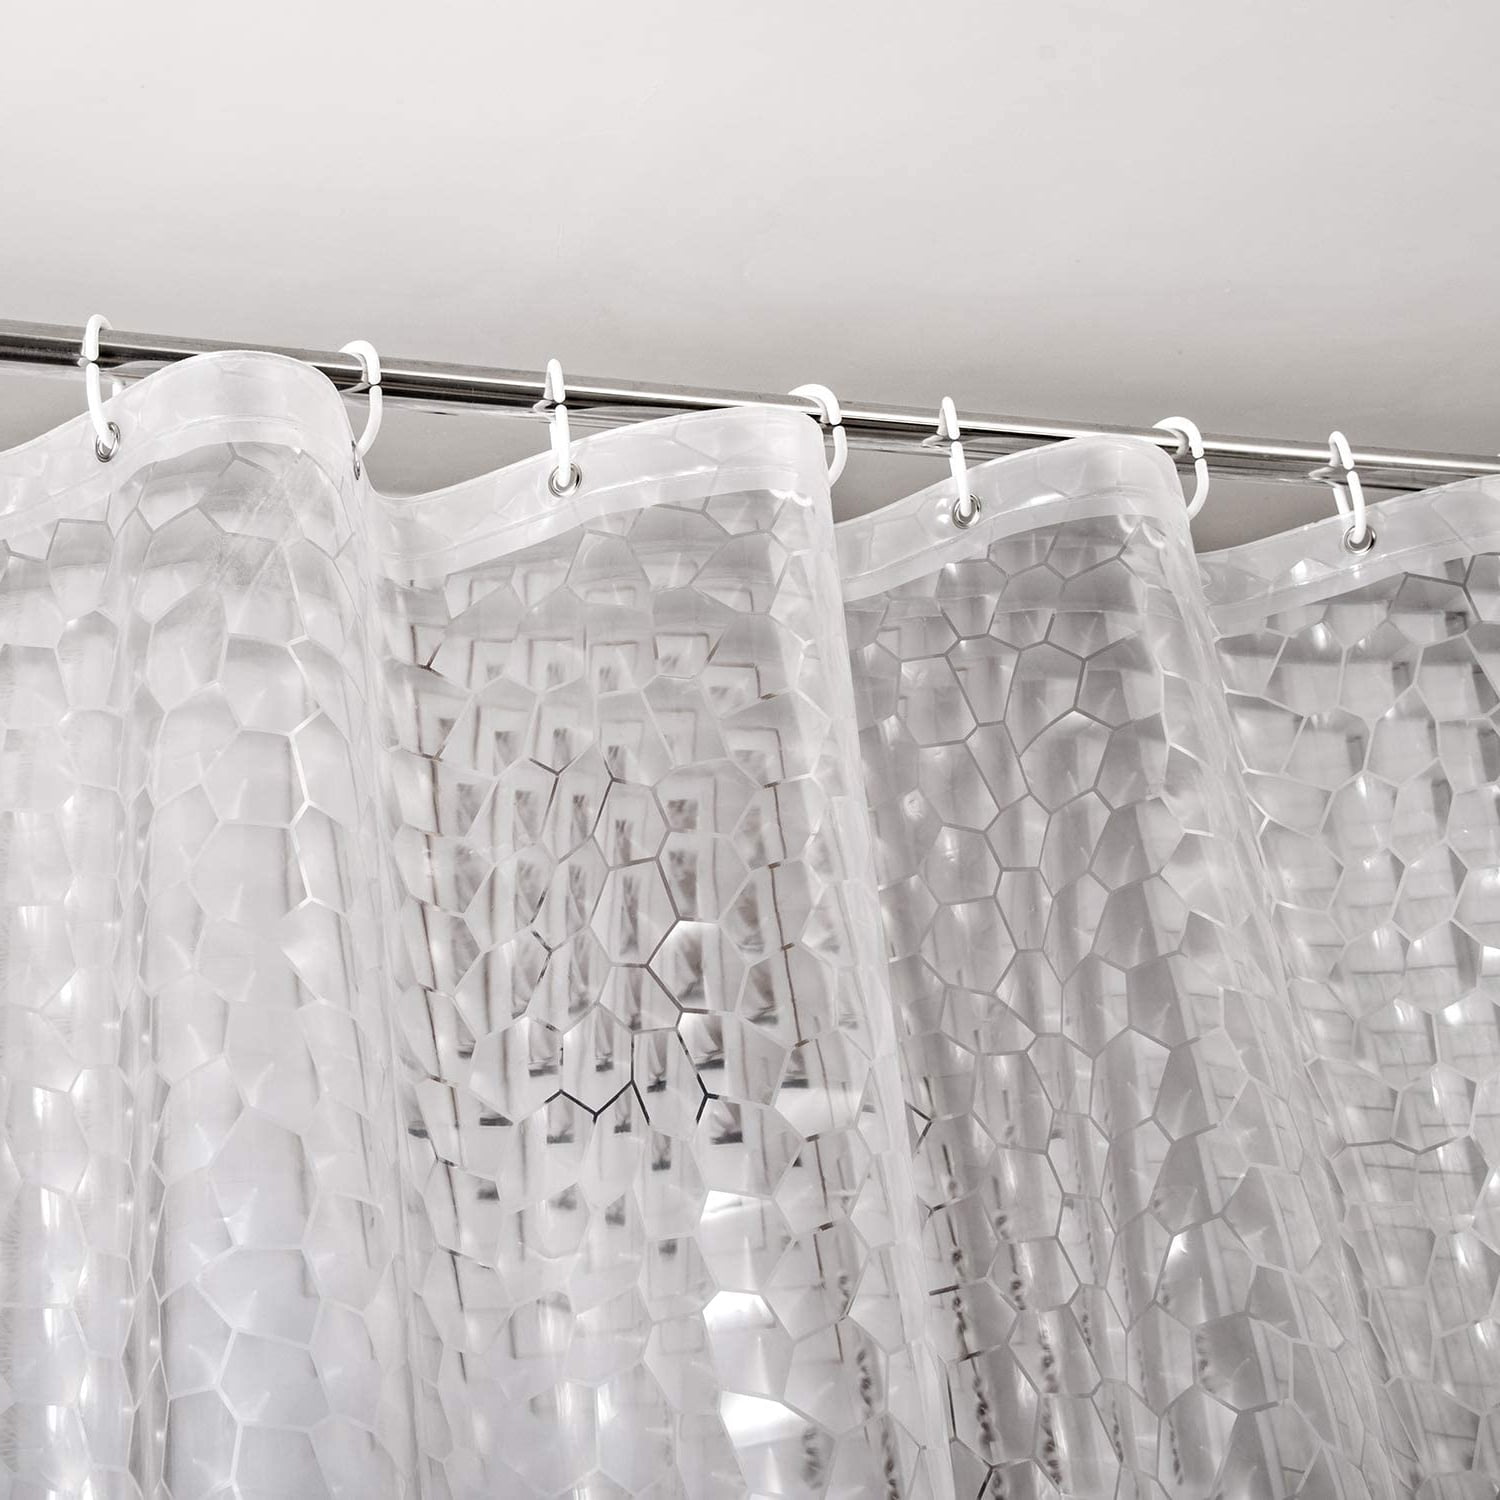 3D Clear Waterproof Bathroom Shower Curtain Liner Plastic PEVA With Hook 12 Size 